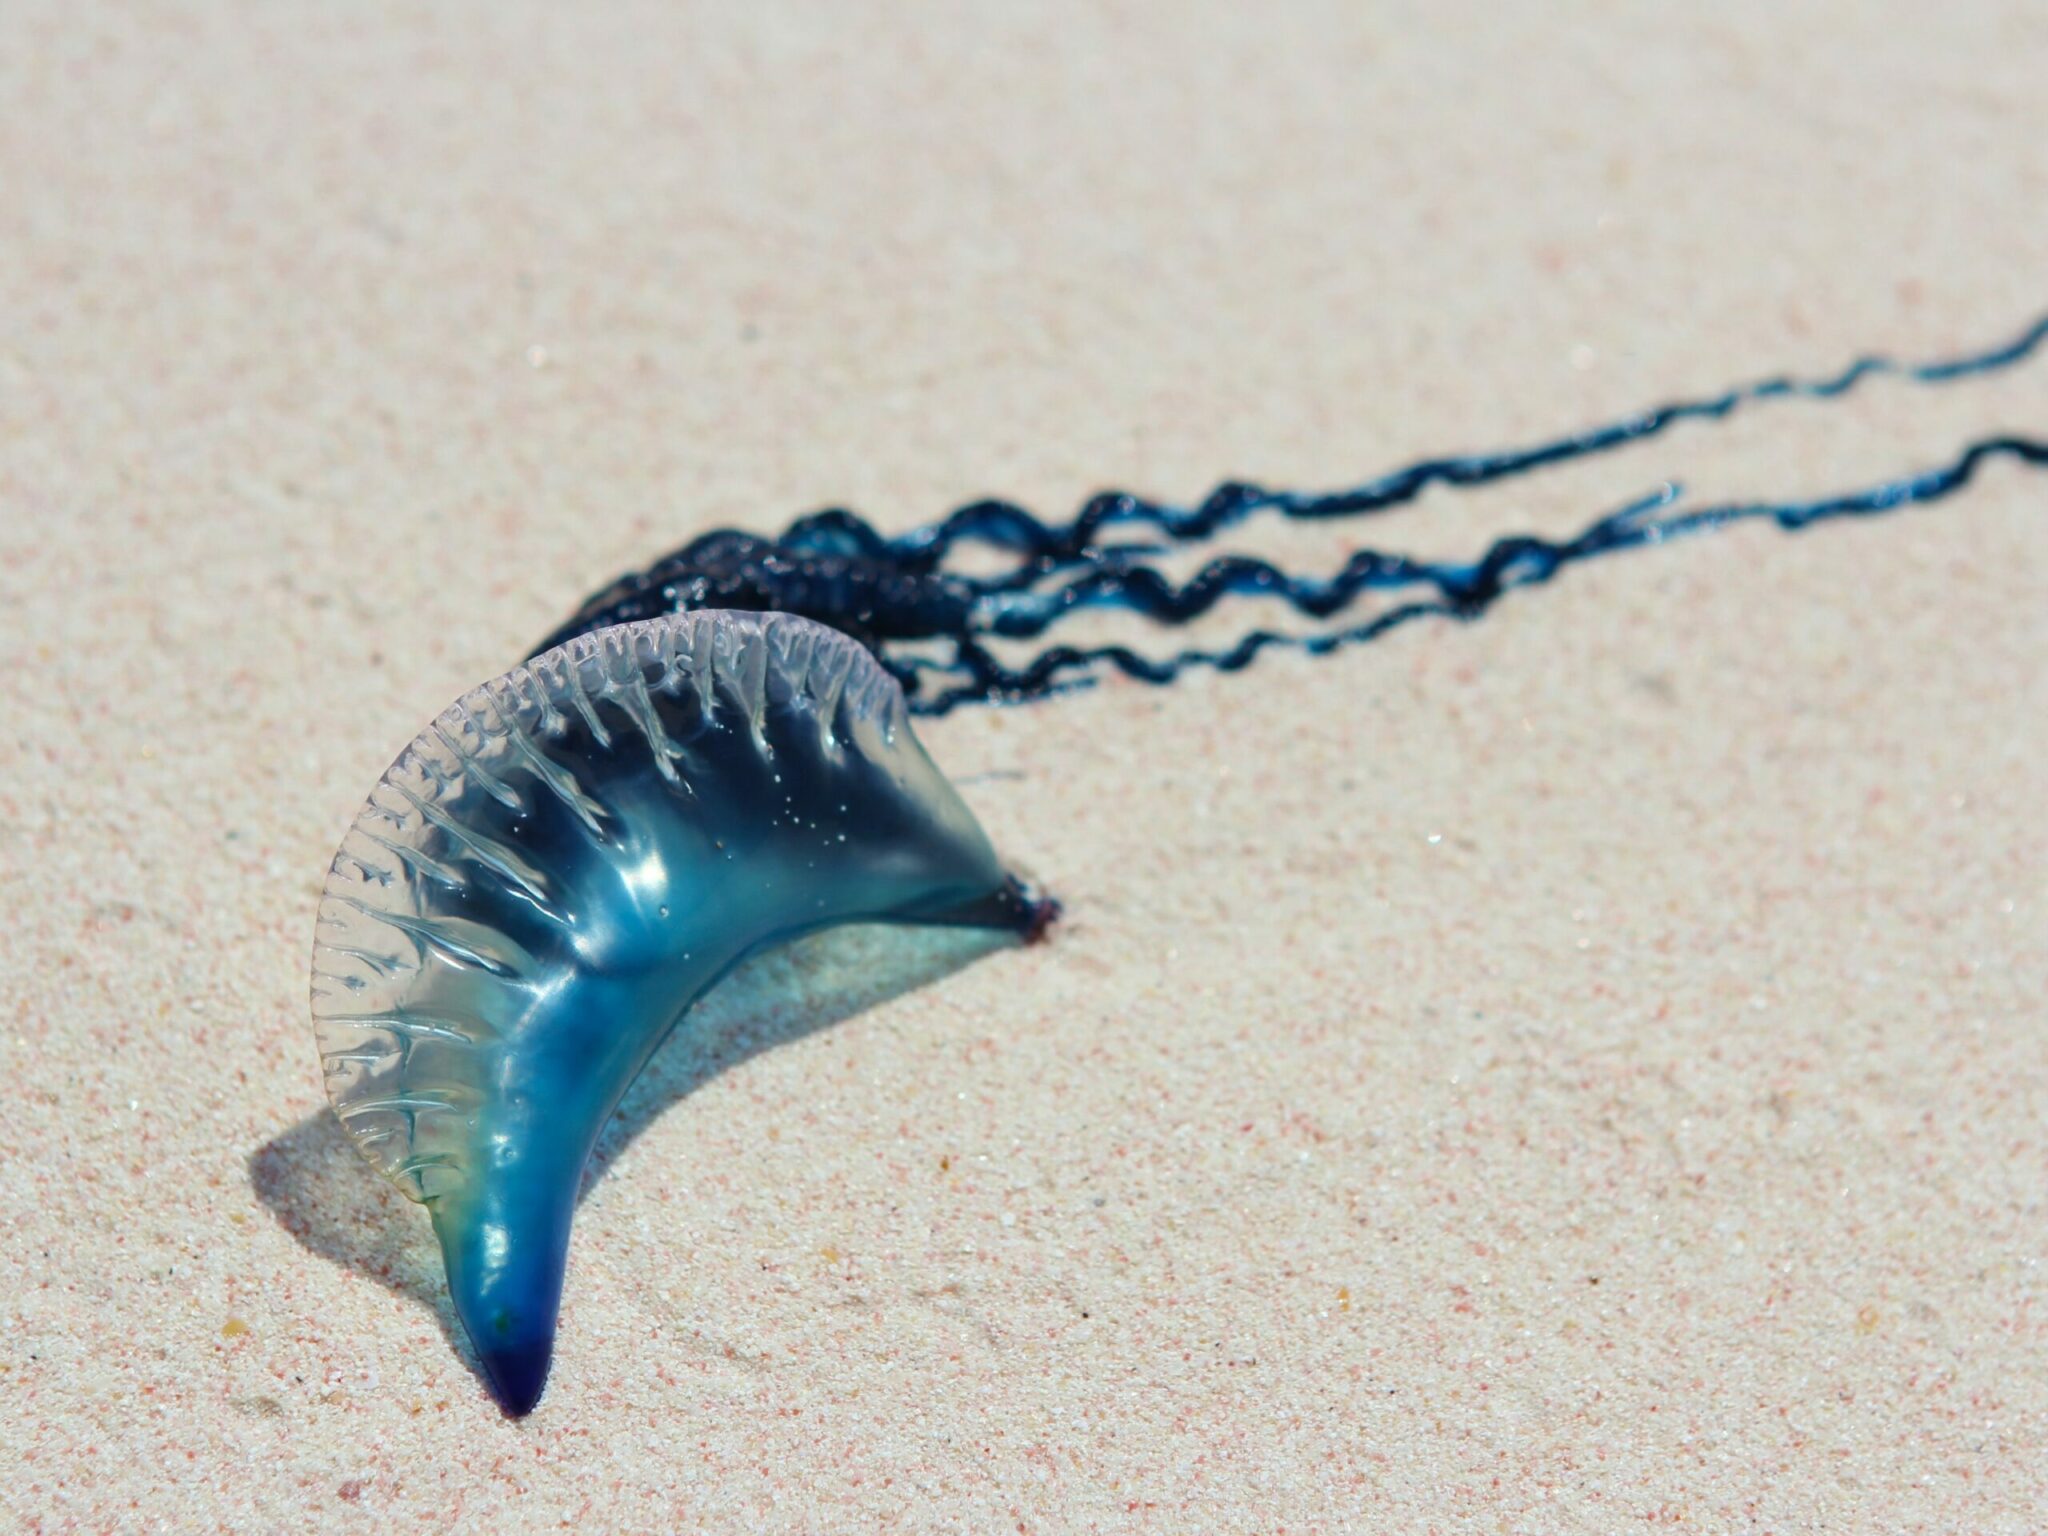 why is the portuguese man of war named after a war ship from the 16th century and where does it live